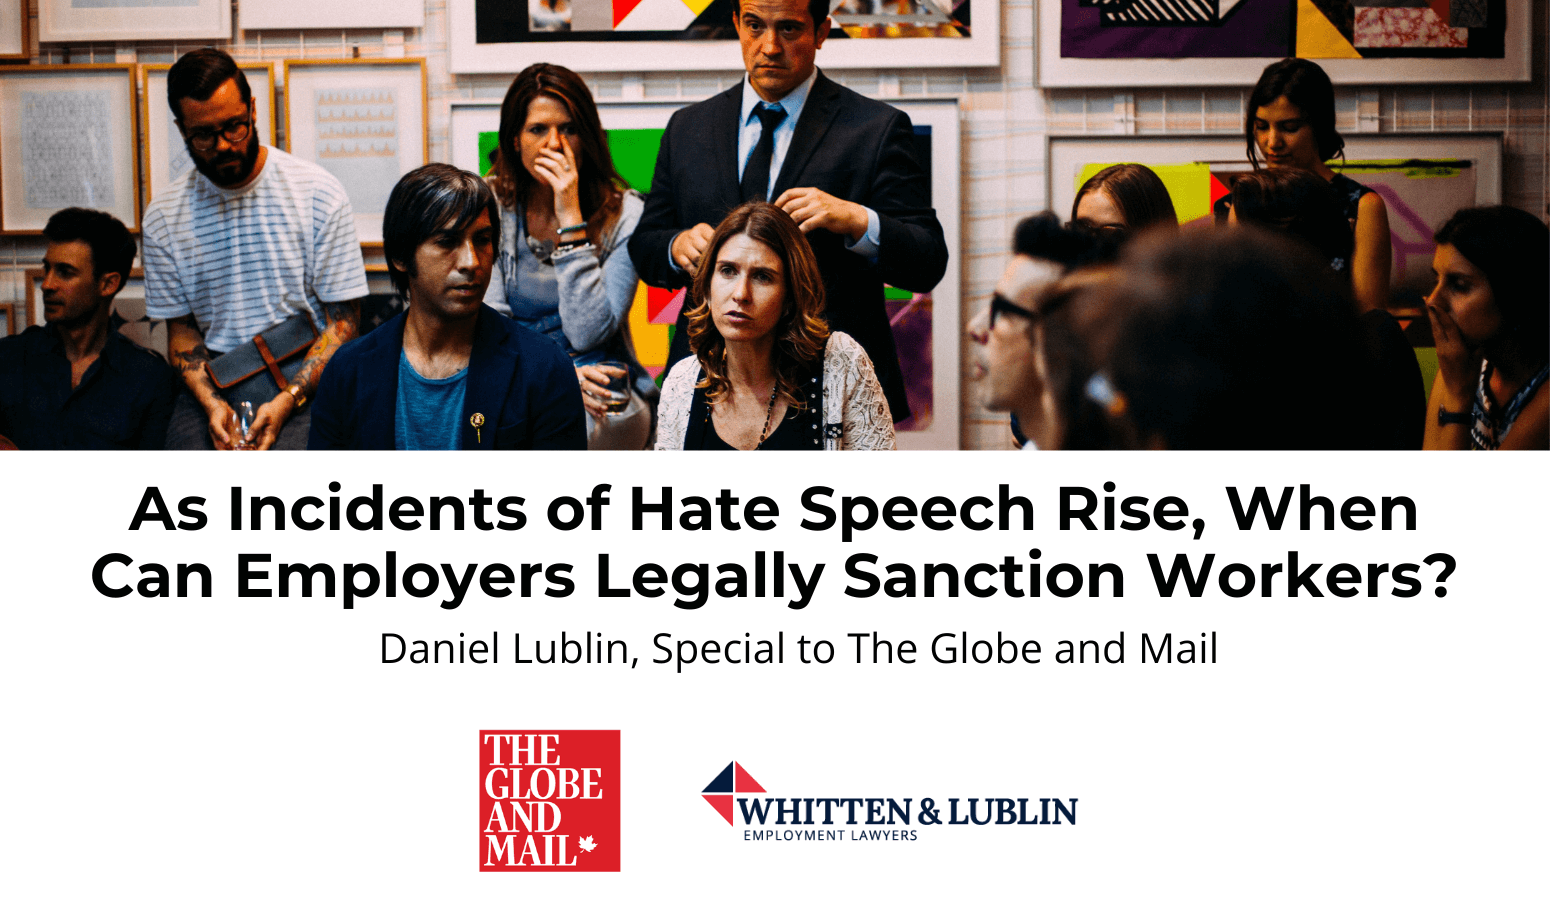 Featured image for “As Incidents of Hate Speech Rise, When Can Employers Legally Sanction Workers?”